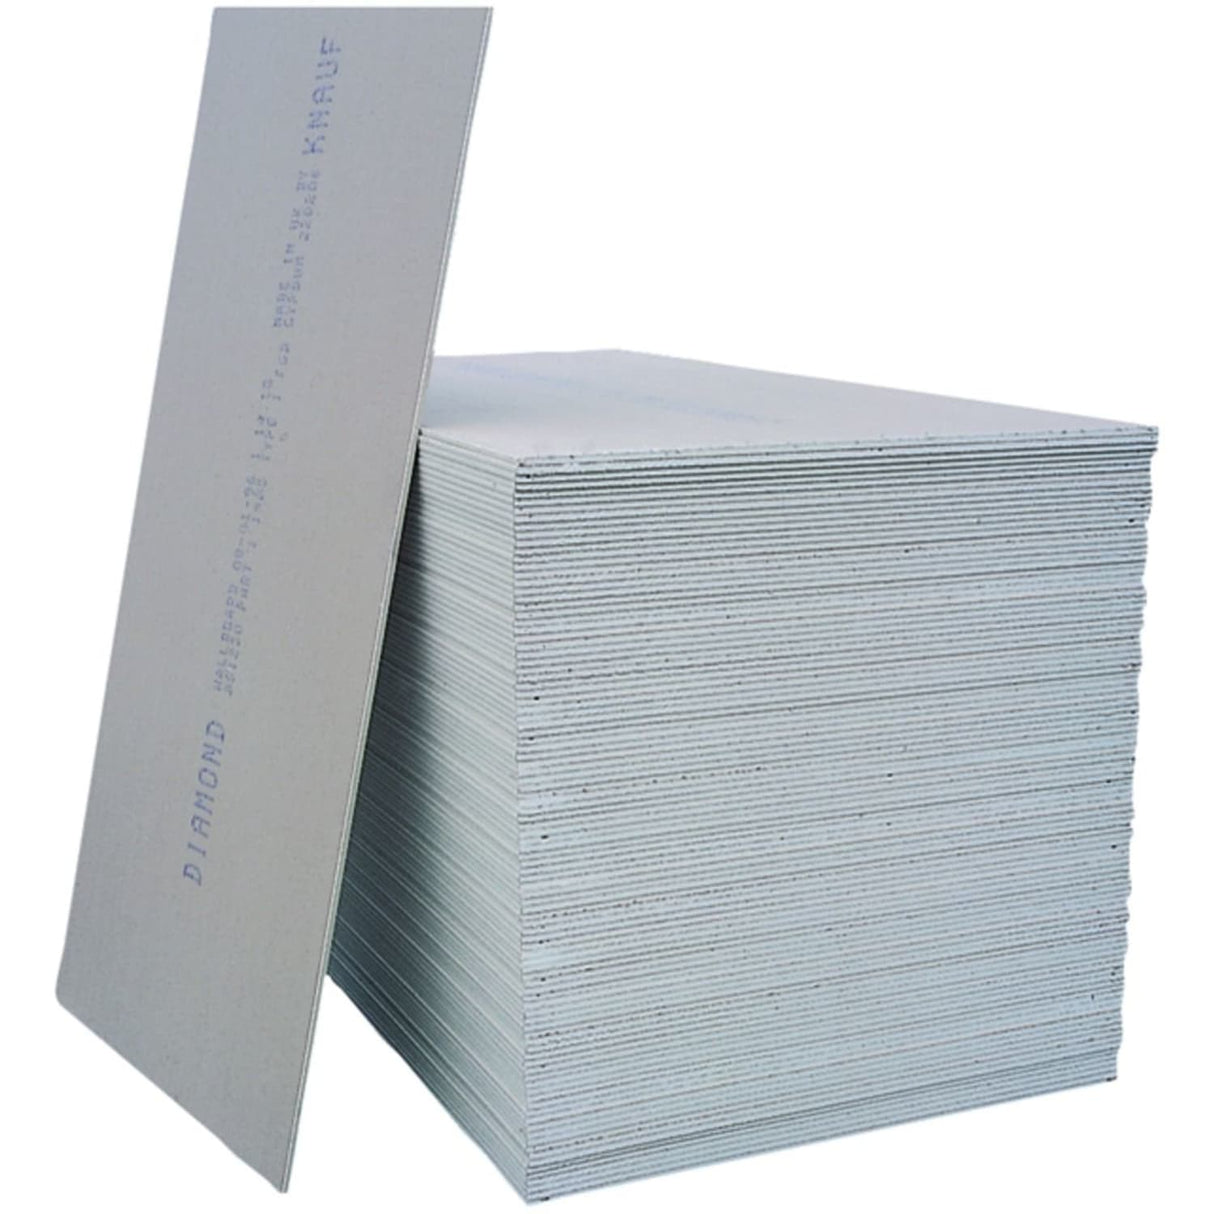 12.5mm Tapered Edge Knauf Vapour Panel Plasterboard - 56 Boards x 1200mm x 2400mm